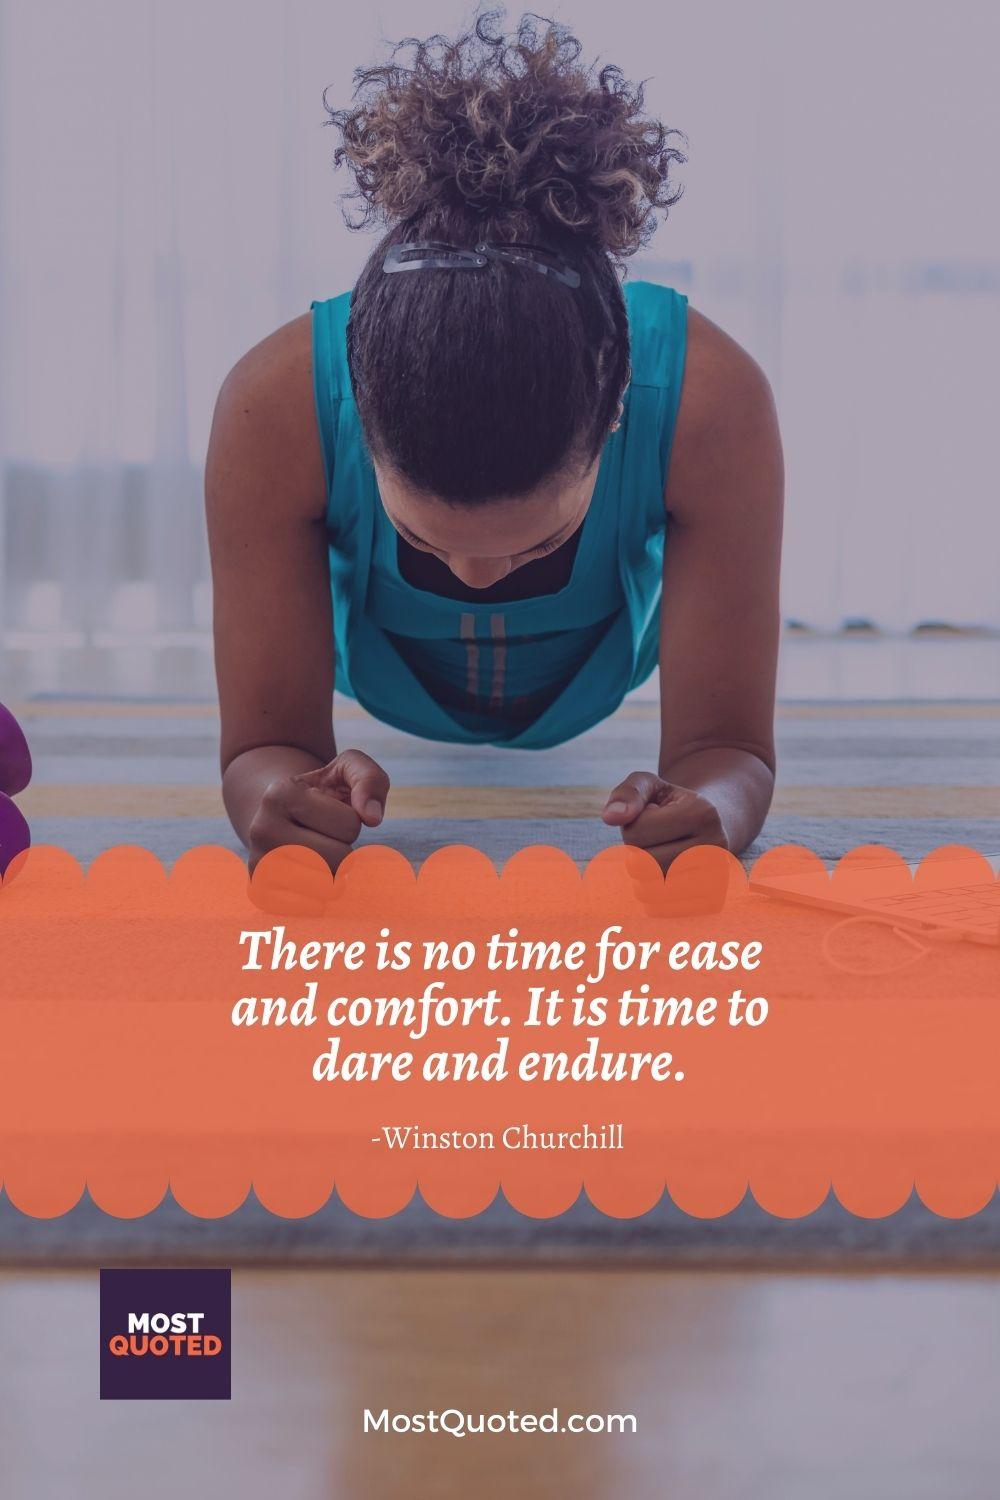 There is no time for ease and comfort. It is time to dare and endure. - Winston Churchill